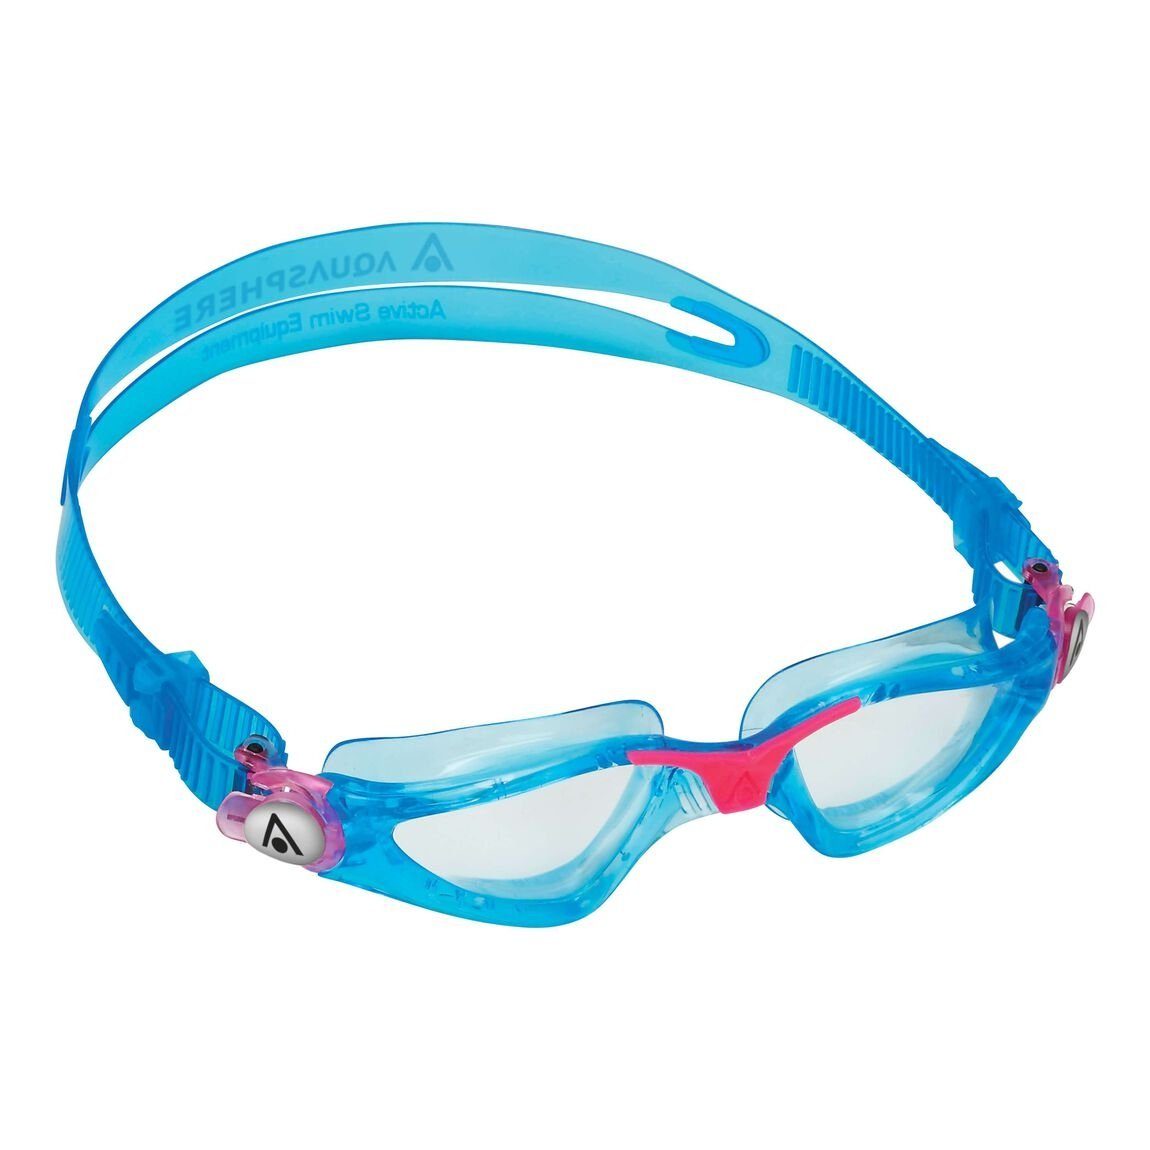 CLE Kinder Aqua Schwimmbrille Schwimmbrille 4302LC Aquasphere PINK LENS Kayenne TURQUOISE Sphere